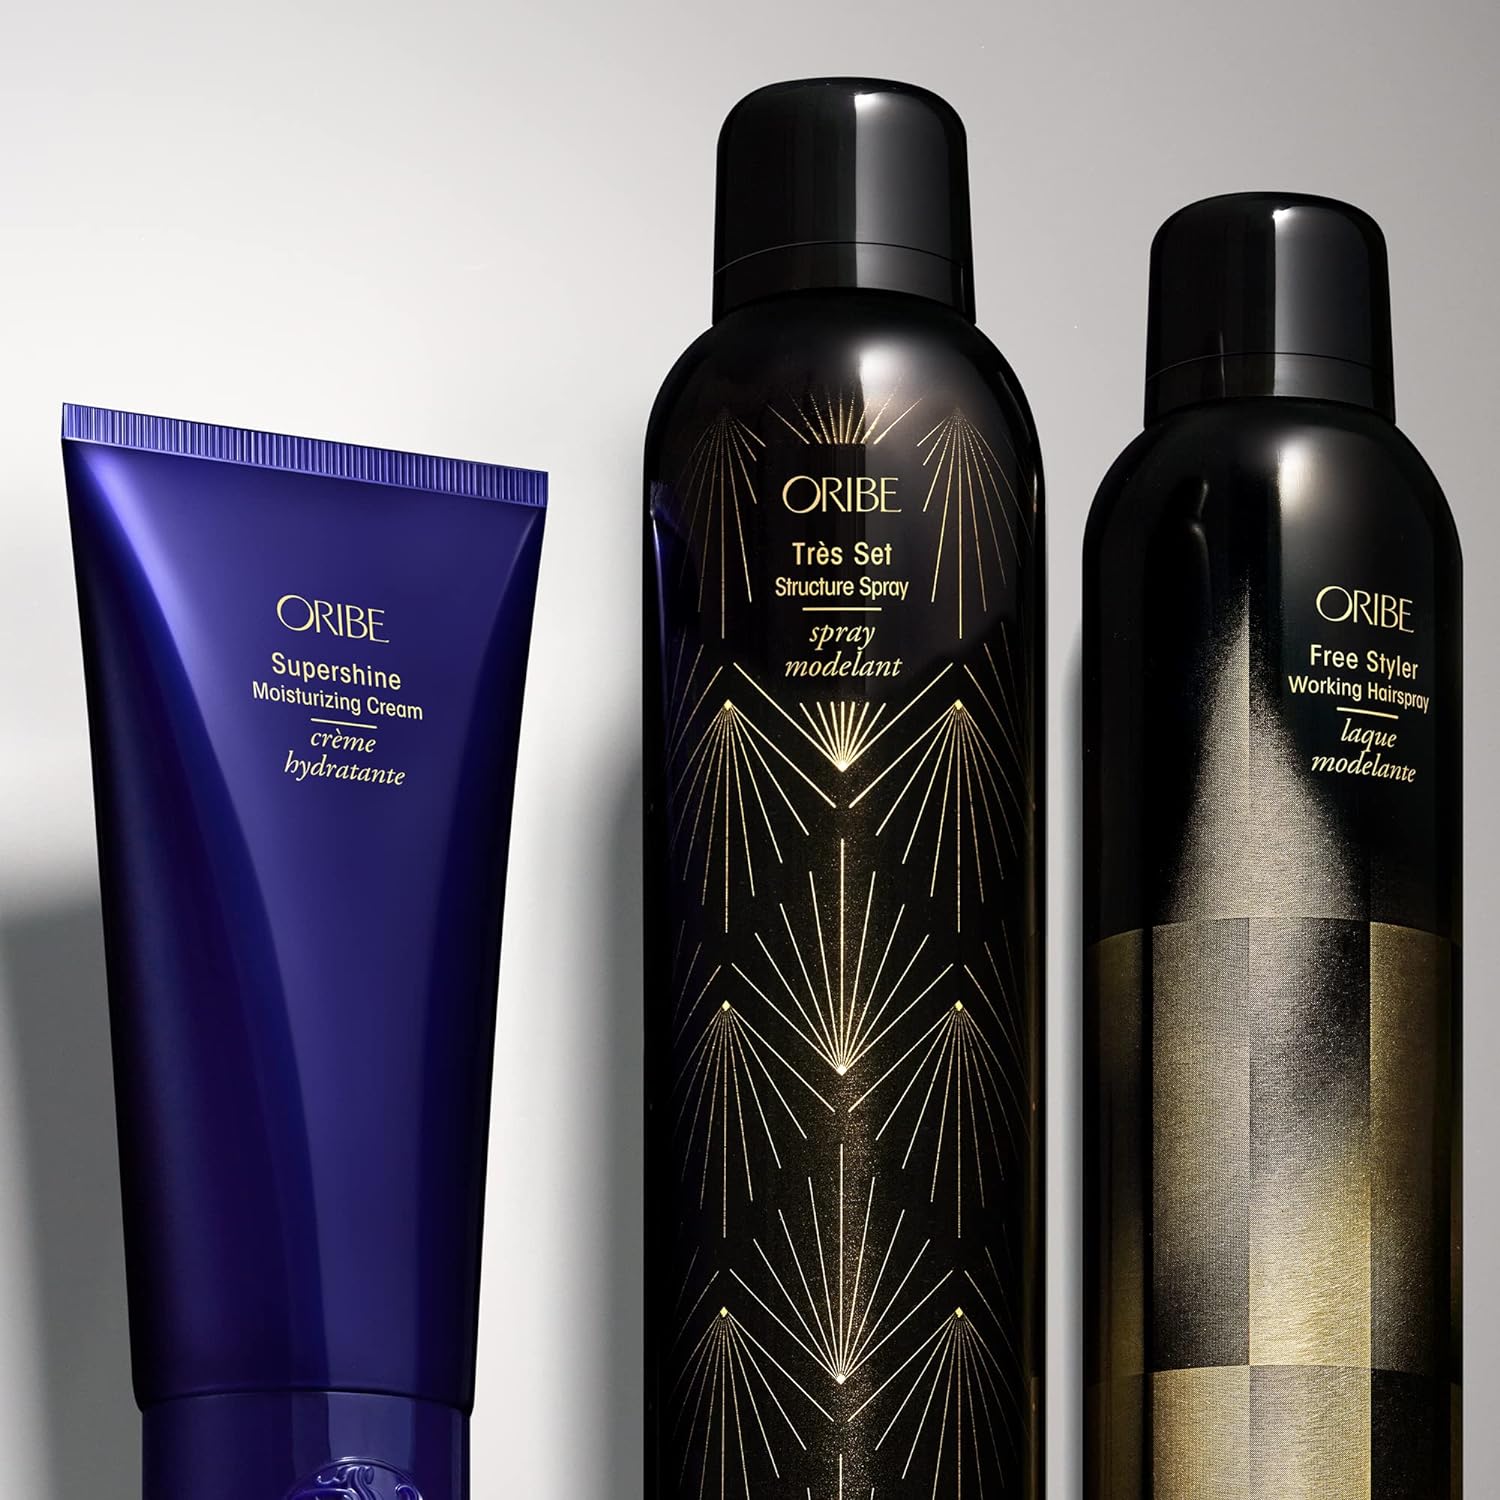 Buy Oribe Free Styler Working Hairspray, 8.8 oz on Amazon.com ? FREE SHIPPING on qualified orders